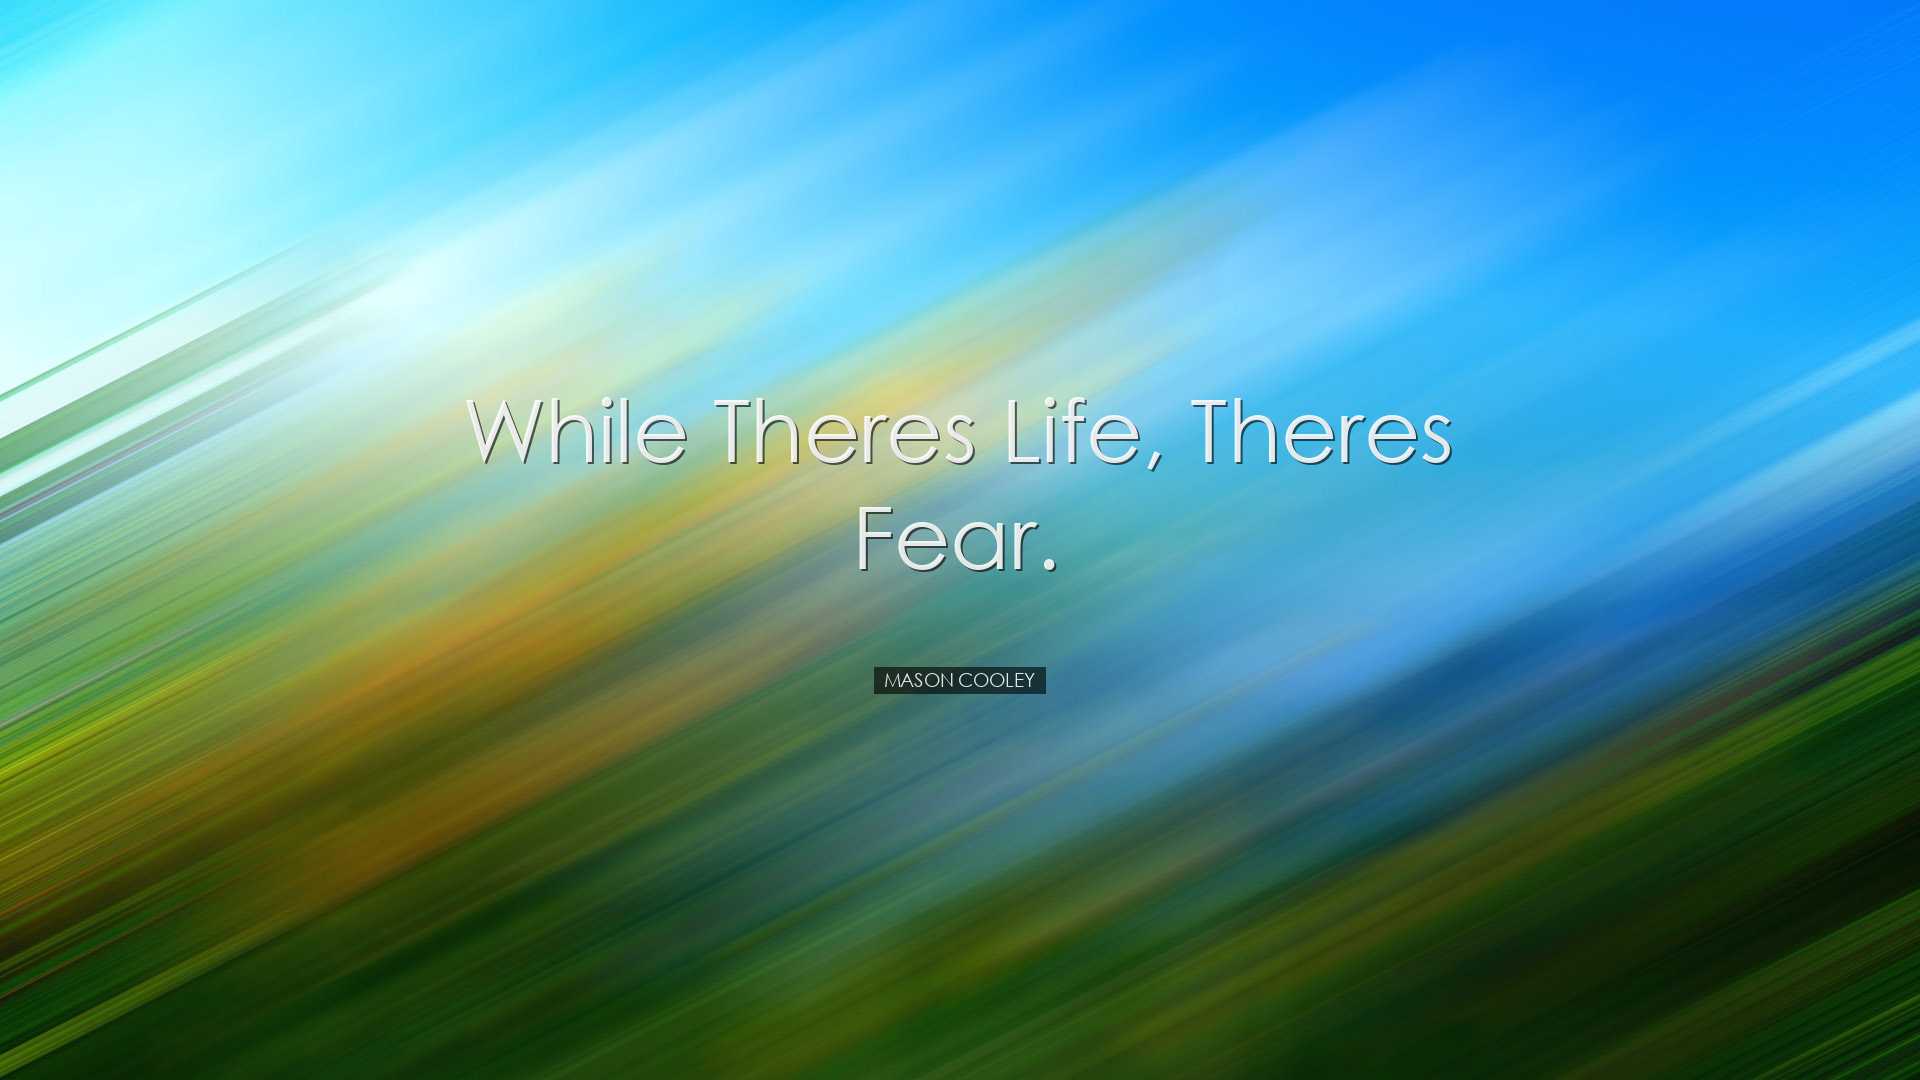 While theres life, theres fear. - Mason Cooley